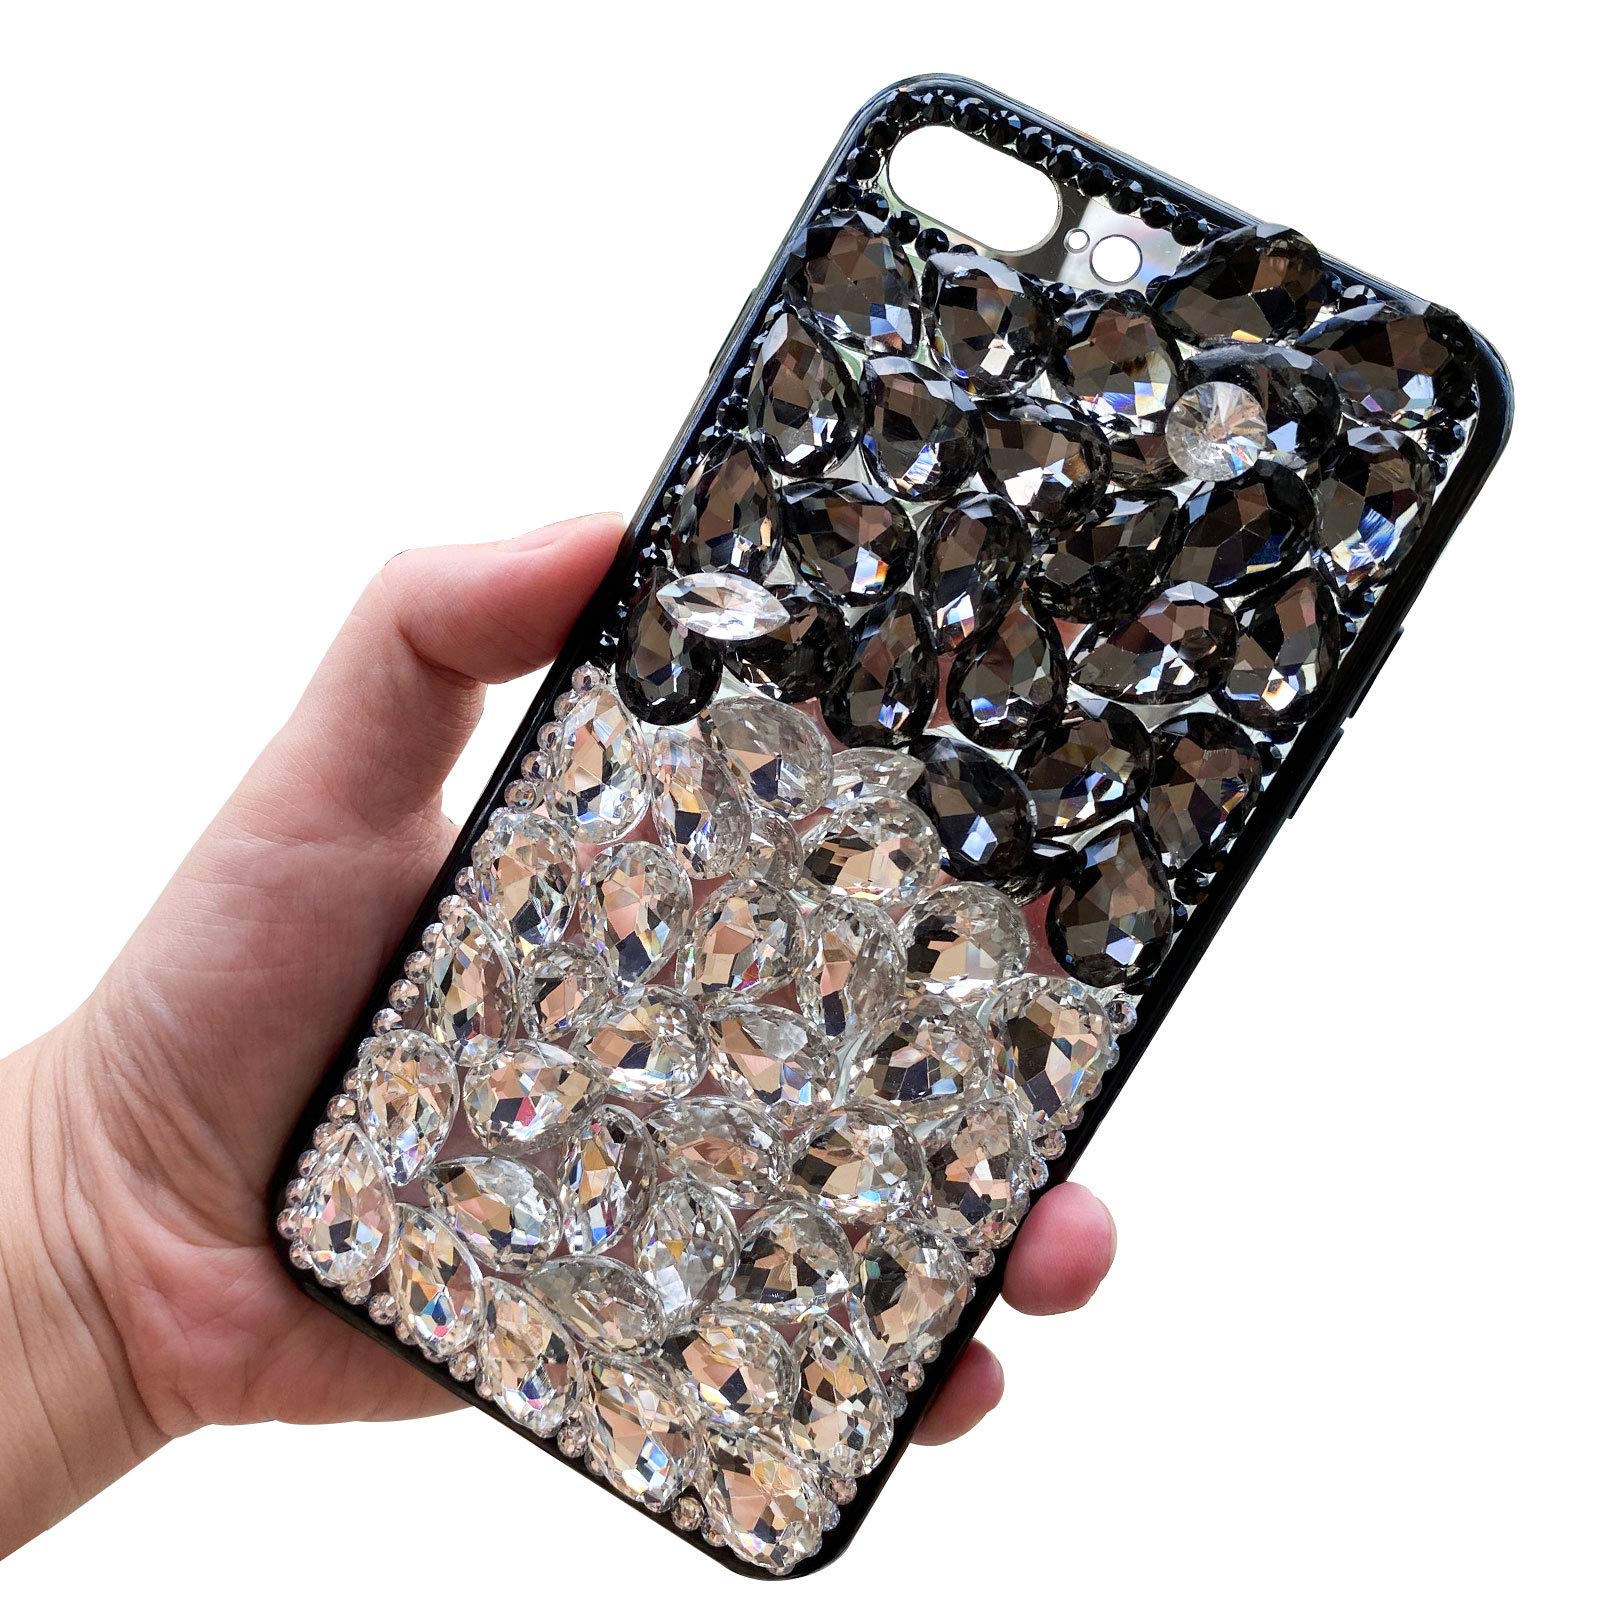 A Smoky Crystal Inspired Phone Casing Held In One Hand